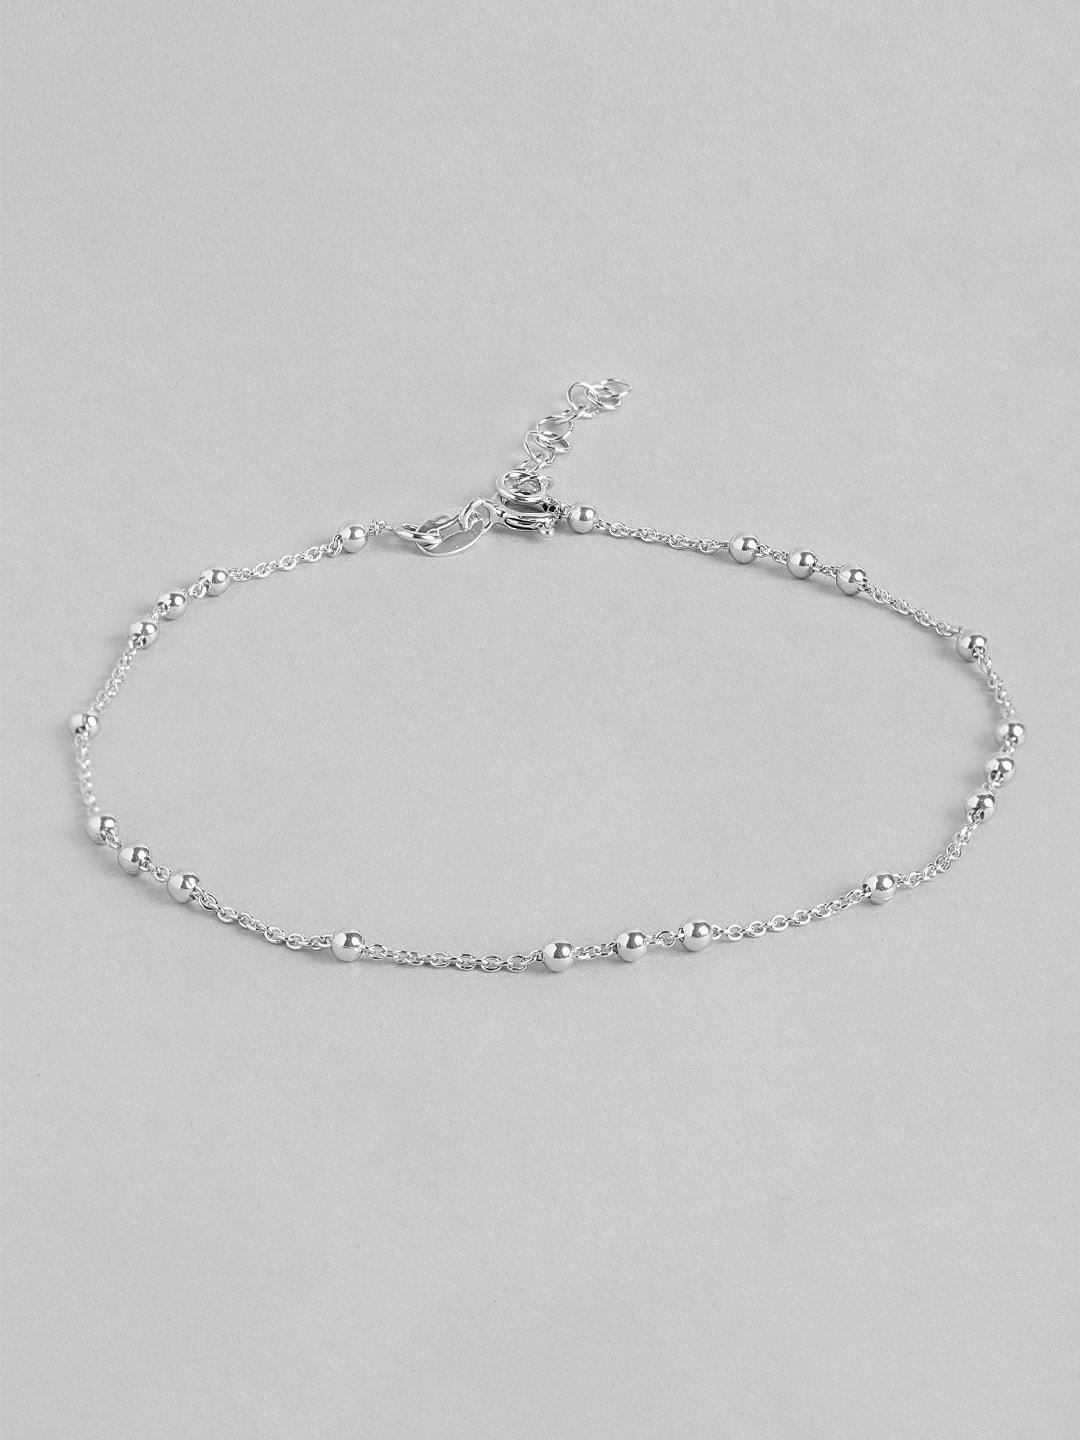 carlton-london--women-rhodium-plated-925-sterling-silver-adjustable-anklet